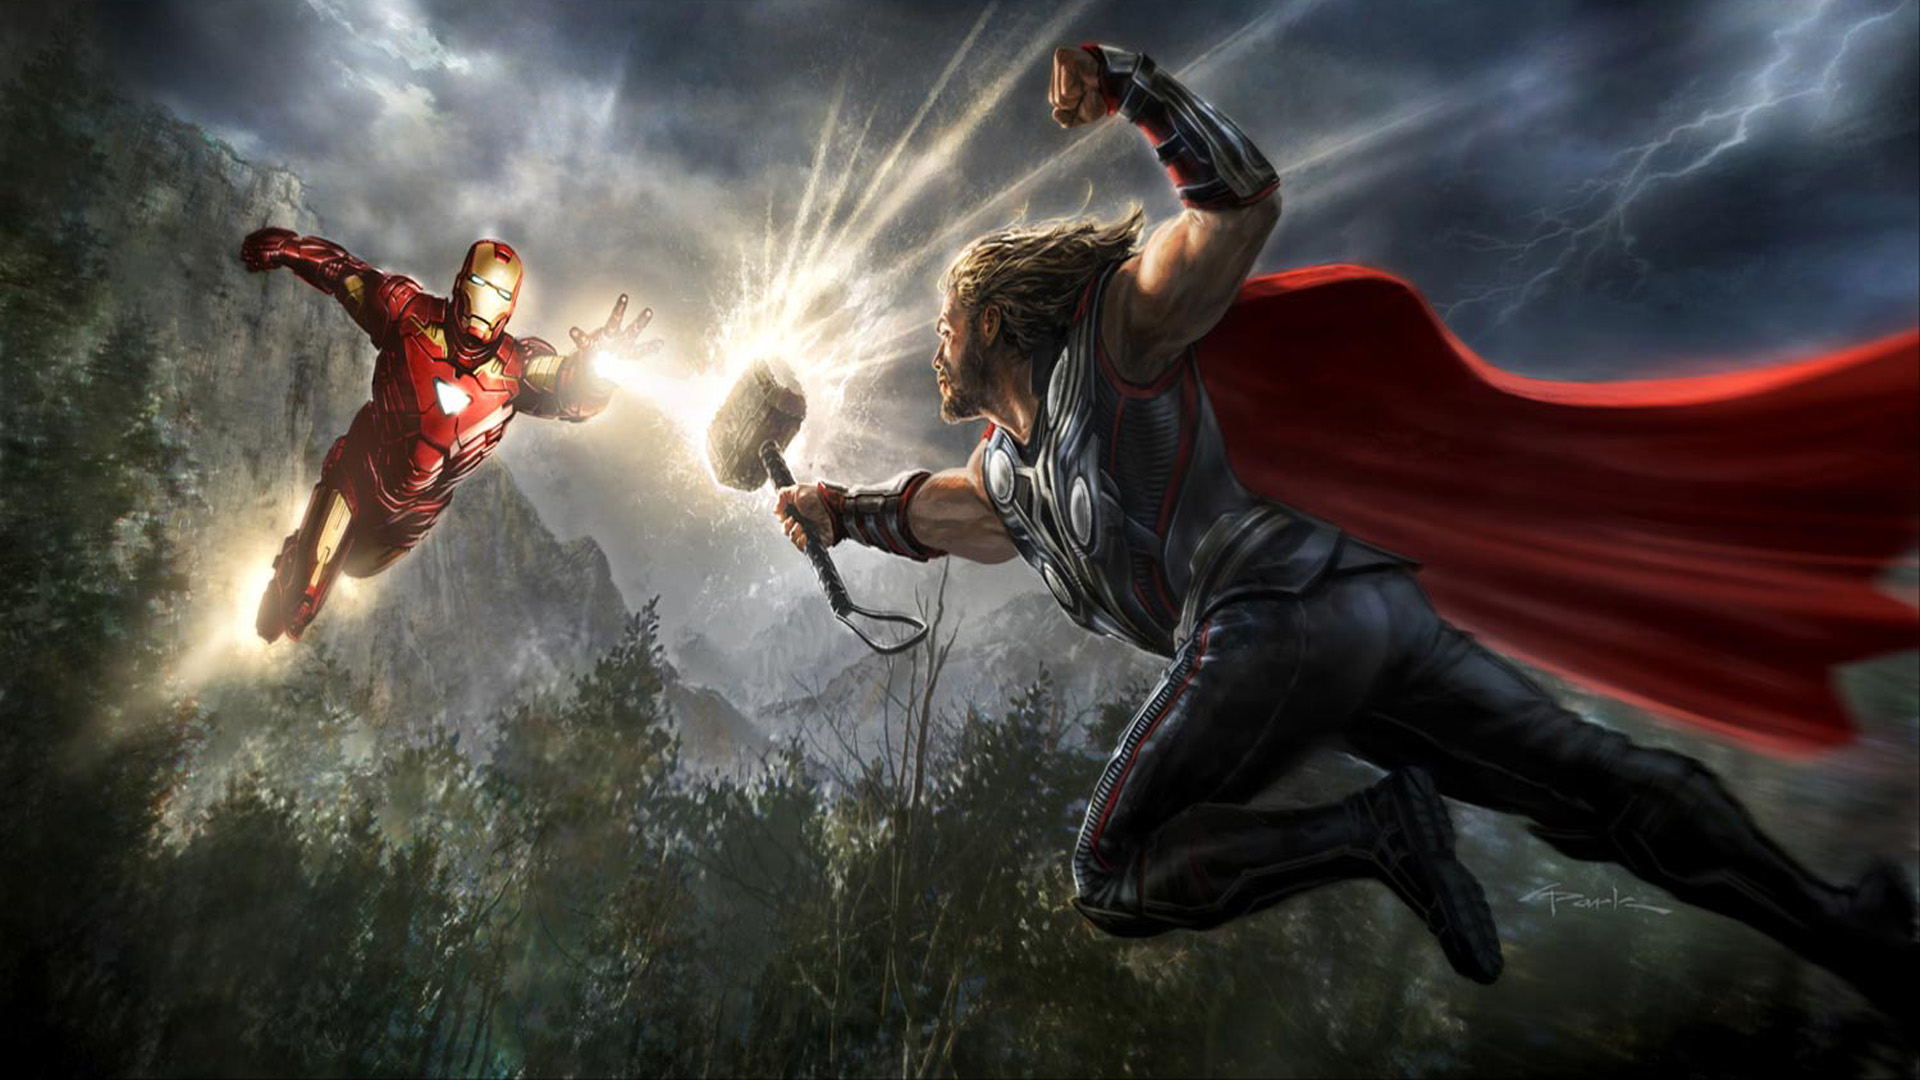 Thor And Iron Man The Avengers Marvel Movies Full HD Wallpaper1920x1080, Wallpaper13.com